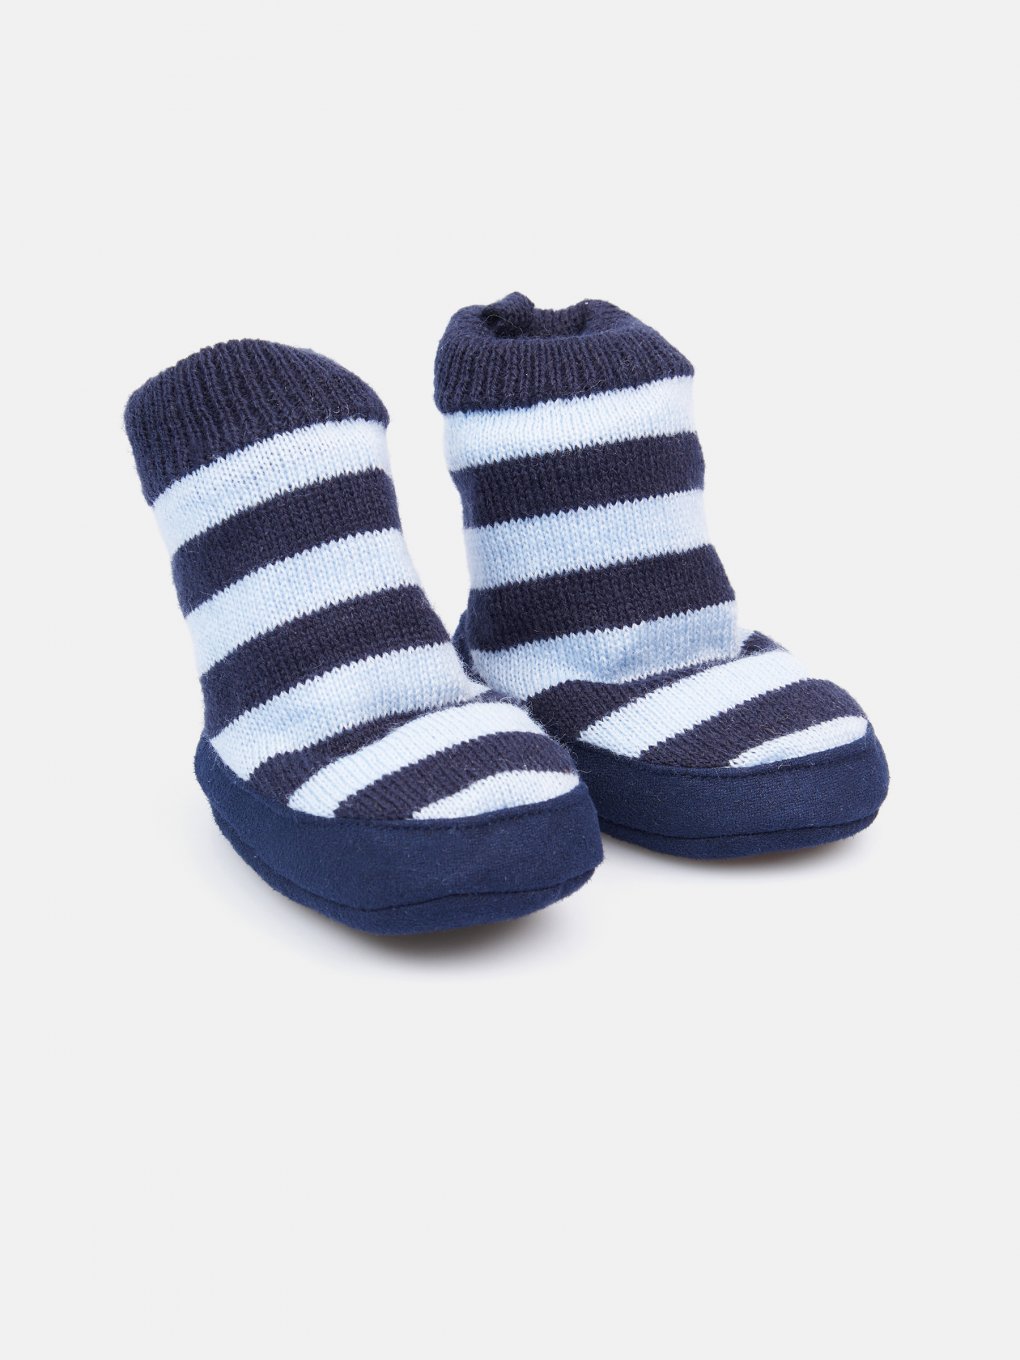 Knitted striped slippers